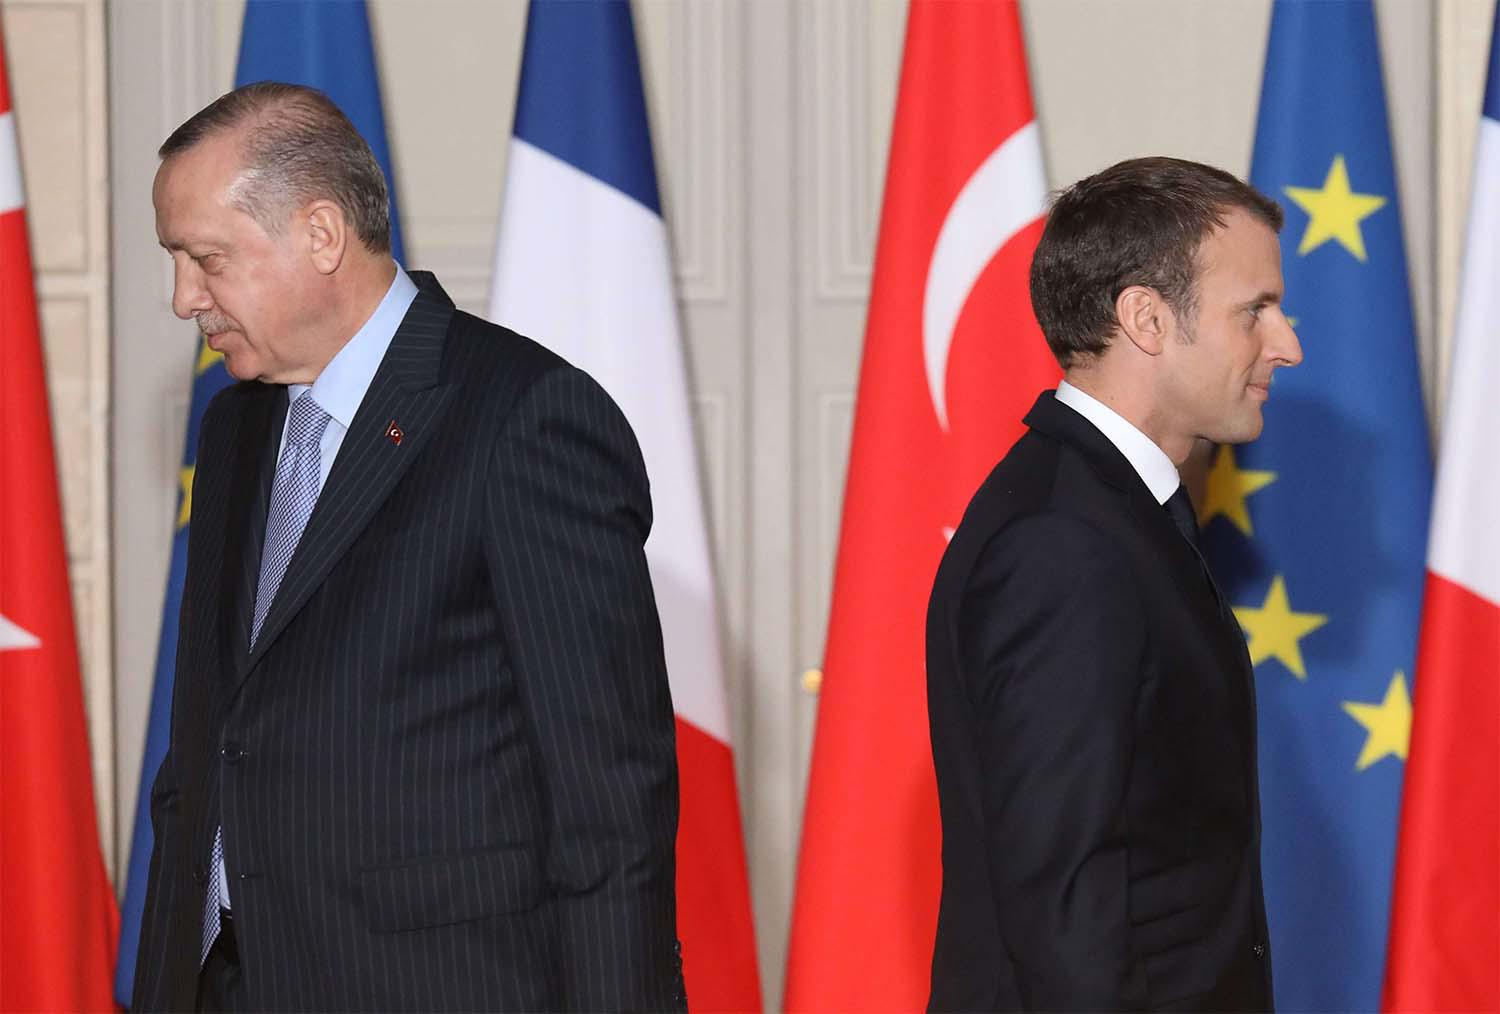 The war of words heats up between Turkey and France